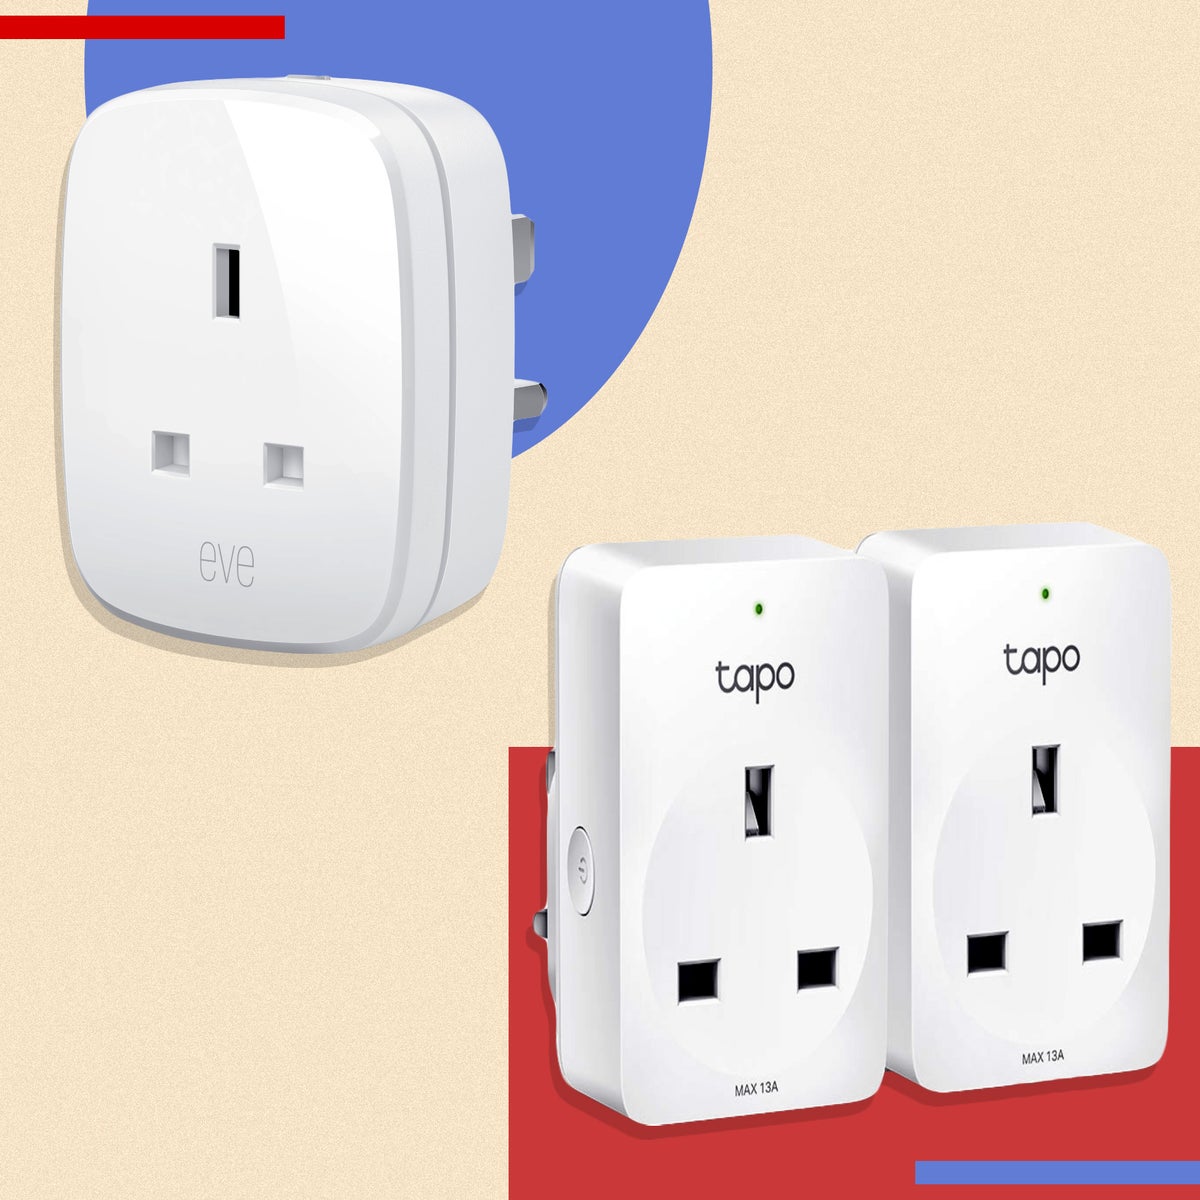 Kasa smart plug review: This energy monitoring plug is great - Reviewed